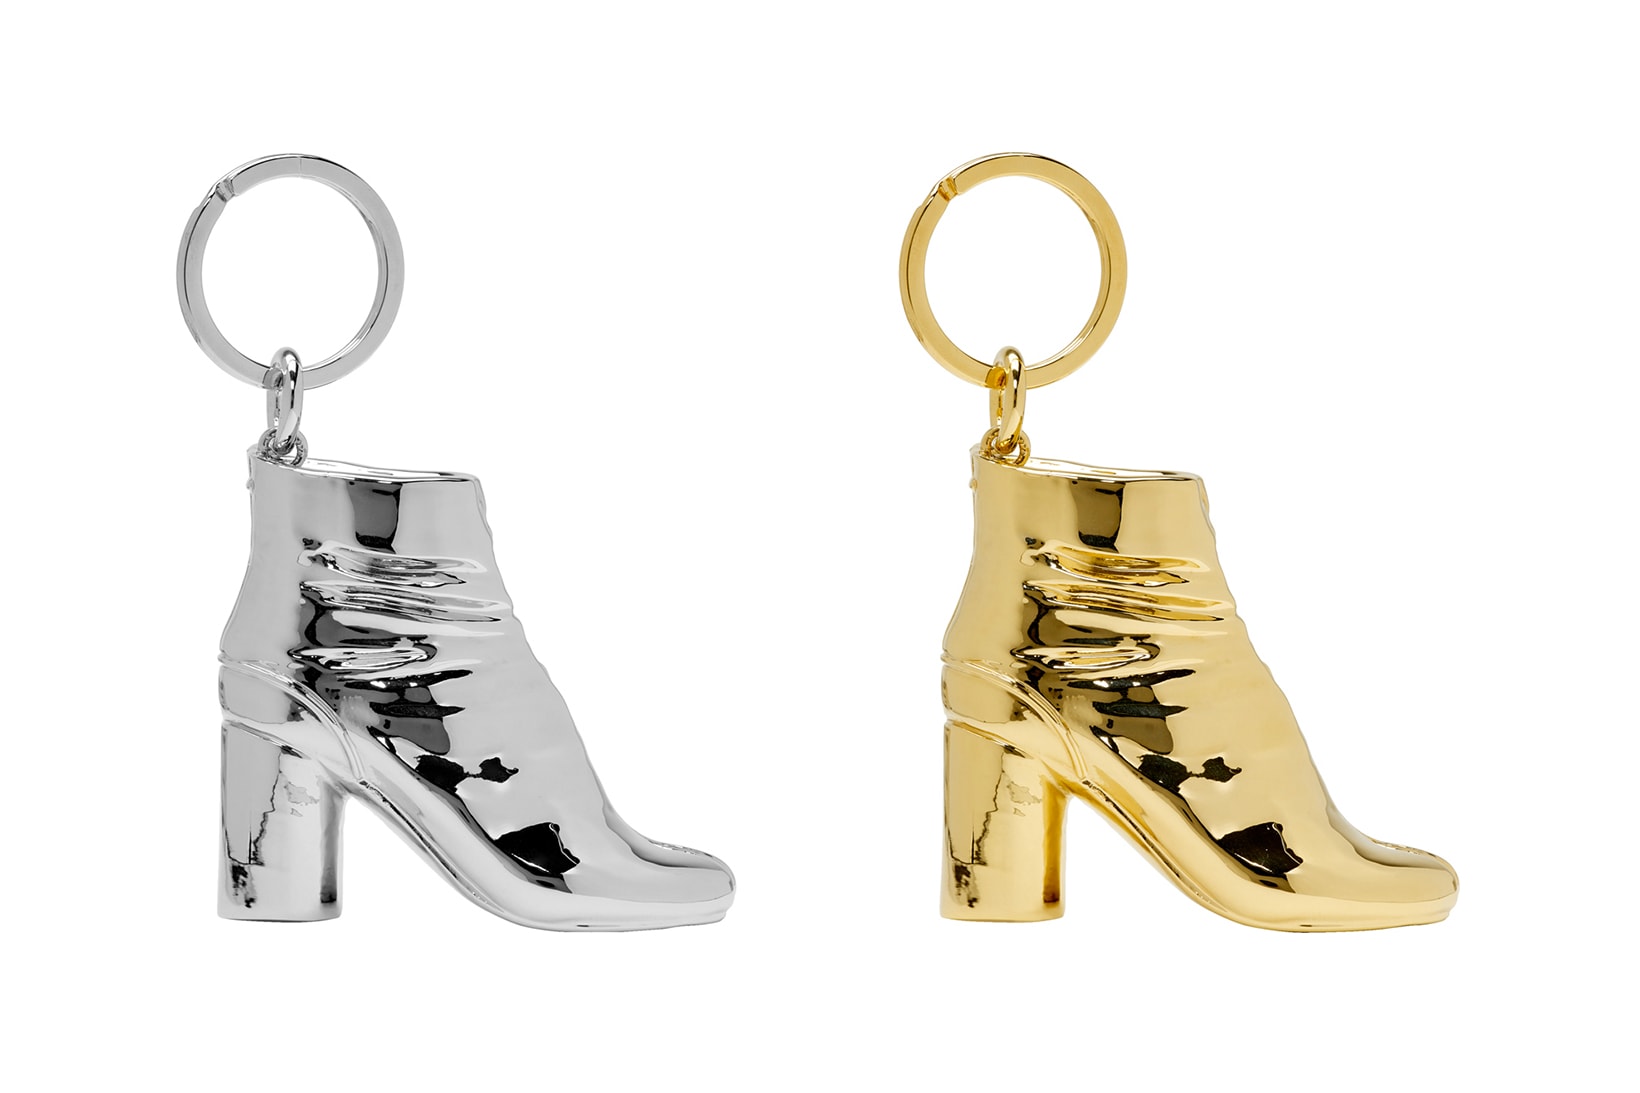 Maison Margiela Exclusive Tabi Boot Keychain Accessory SSENSE Capsule Collection Silver Gold Collector Designer Item Signature Classic